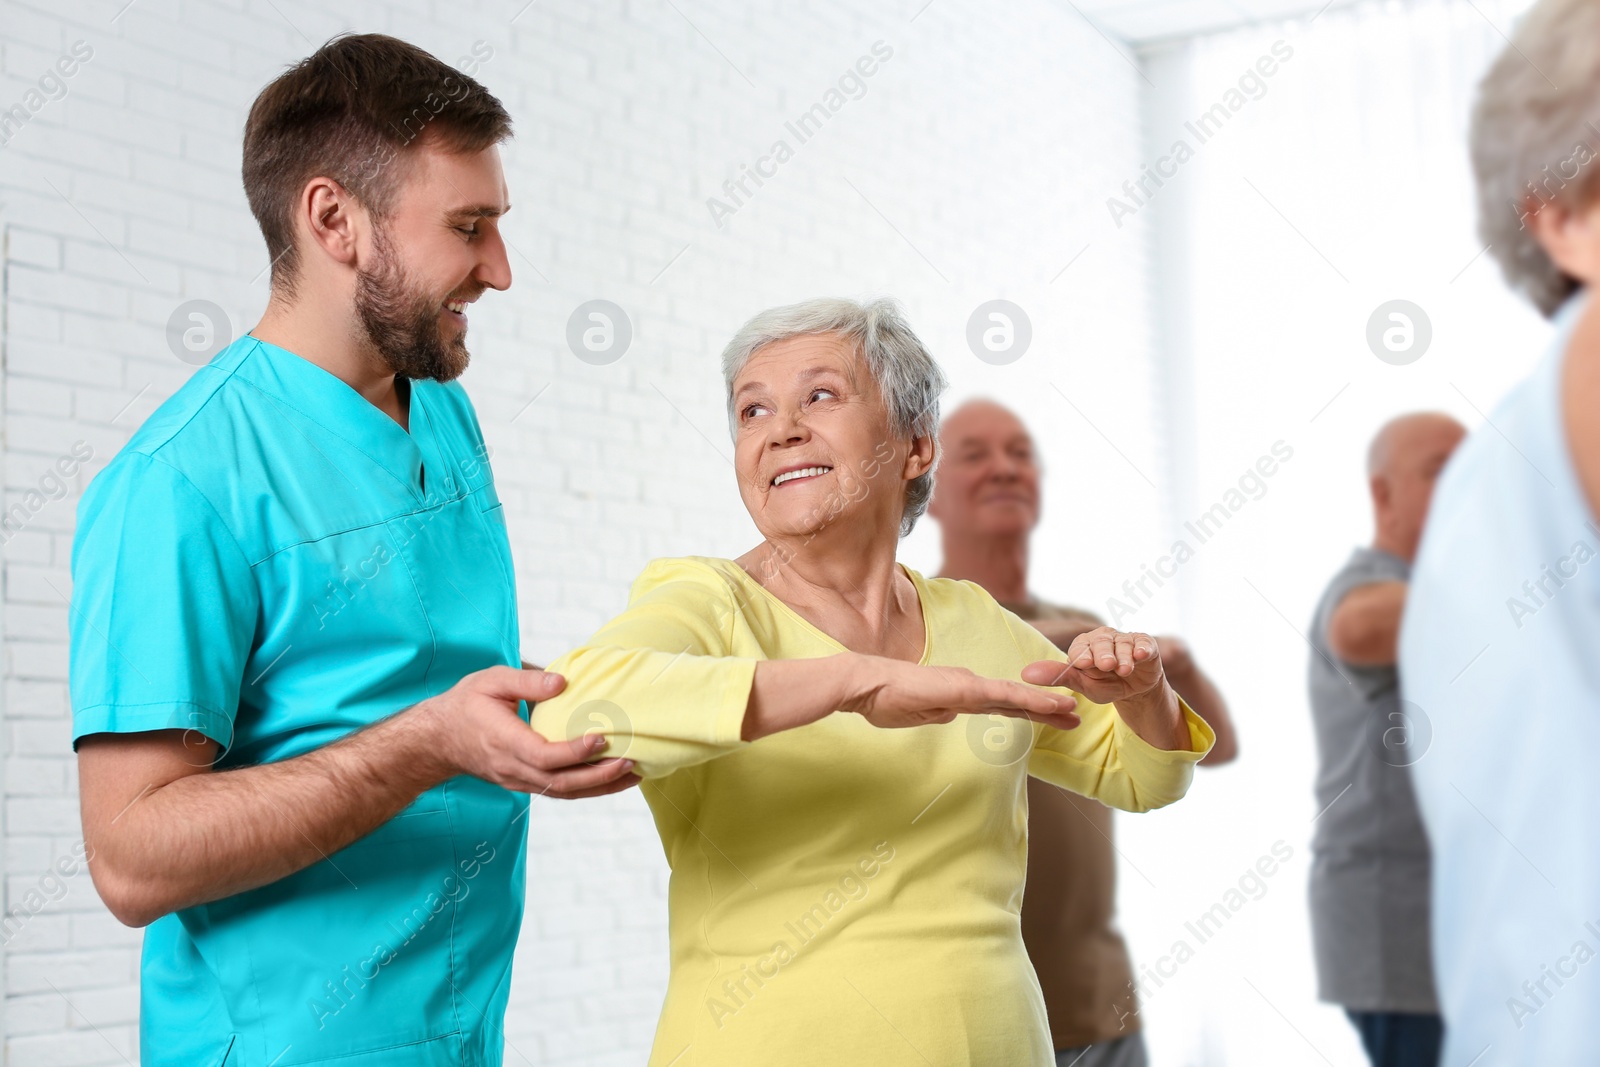 Photo of Care worker helping elderly woman to do sports exercise in hospital gym.